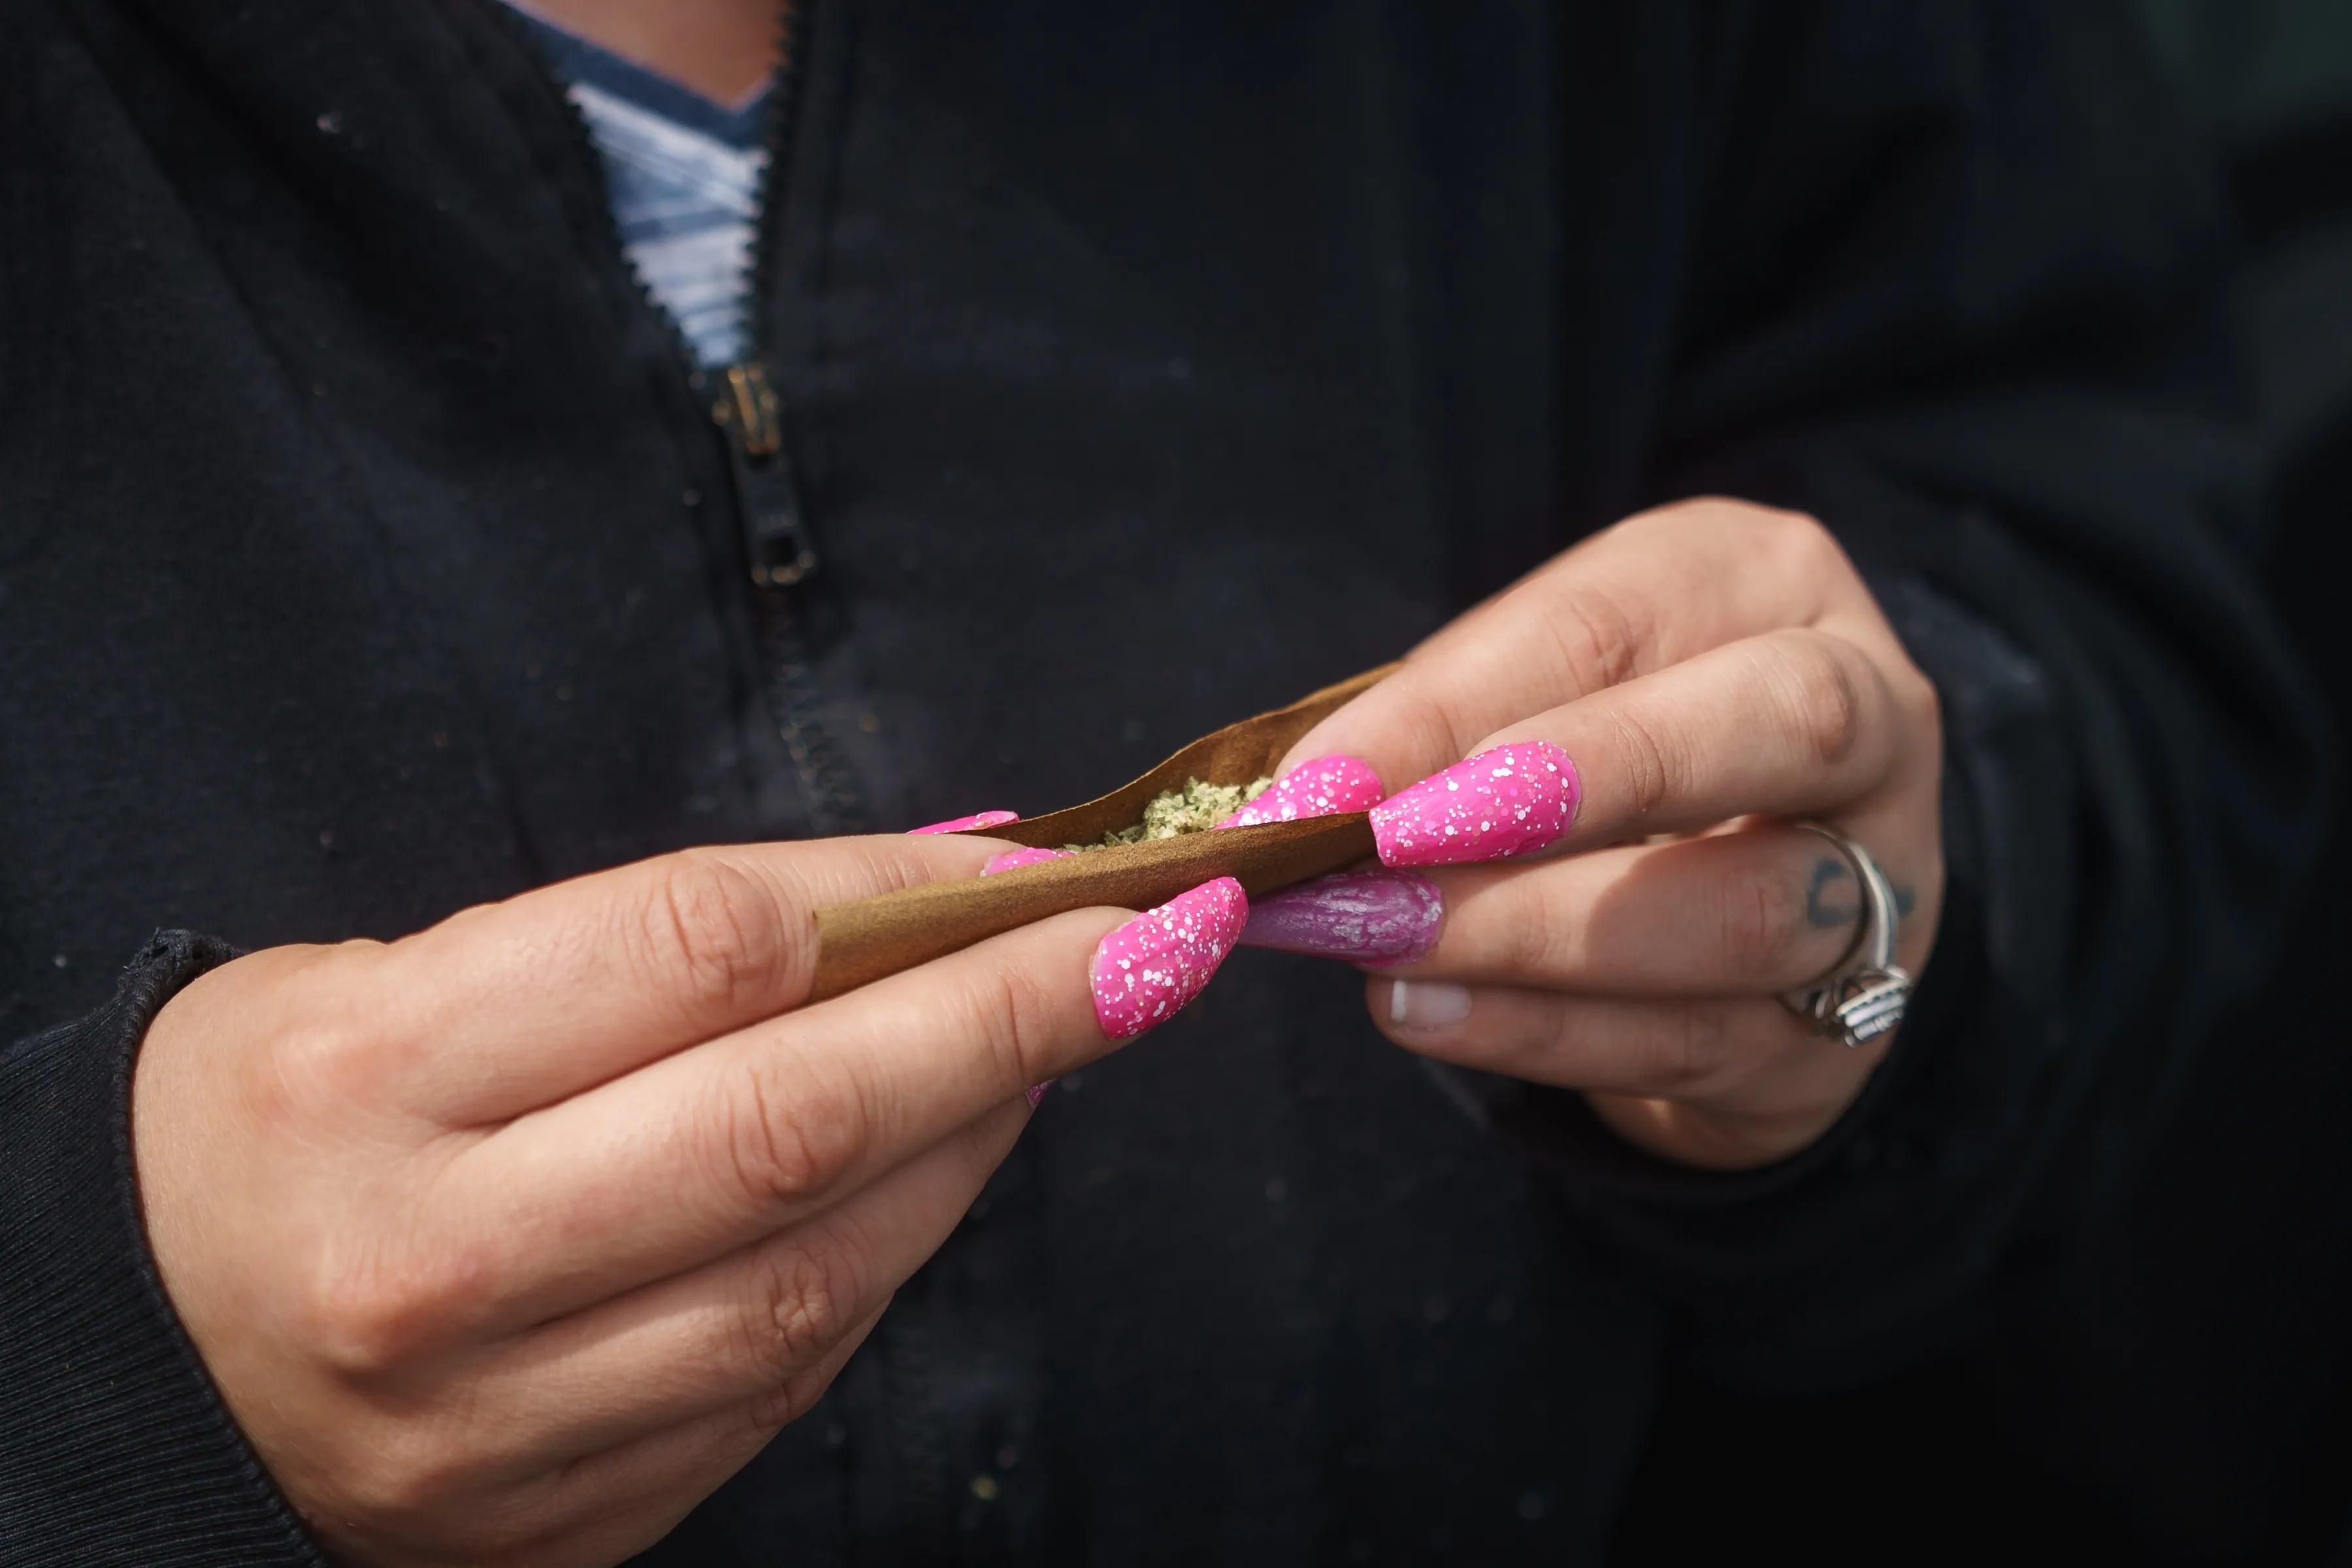 Dionne Finley rolls newly purchased flower, part of the cannabis plant, in Williamstown, on the first day of recreational cannabis sales in New Jersey.